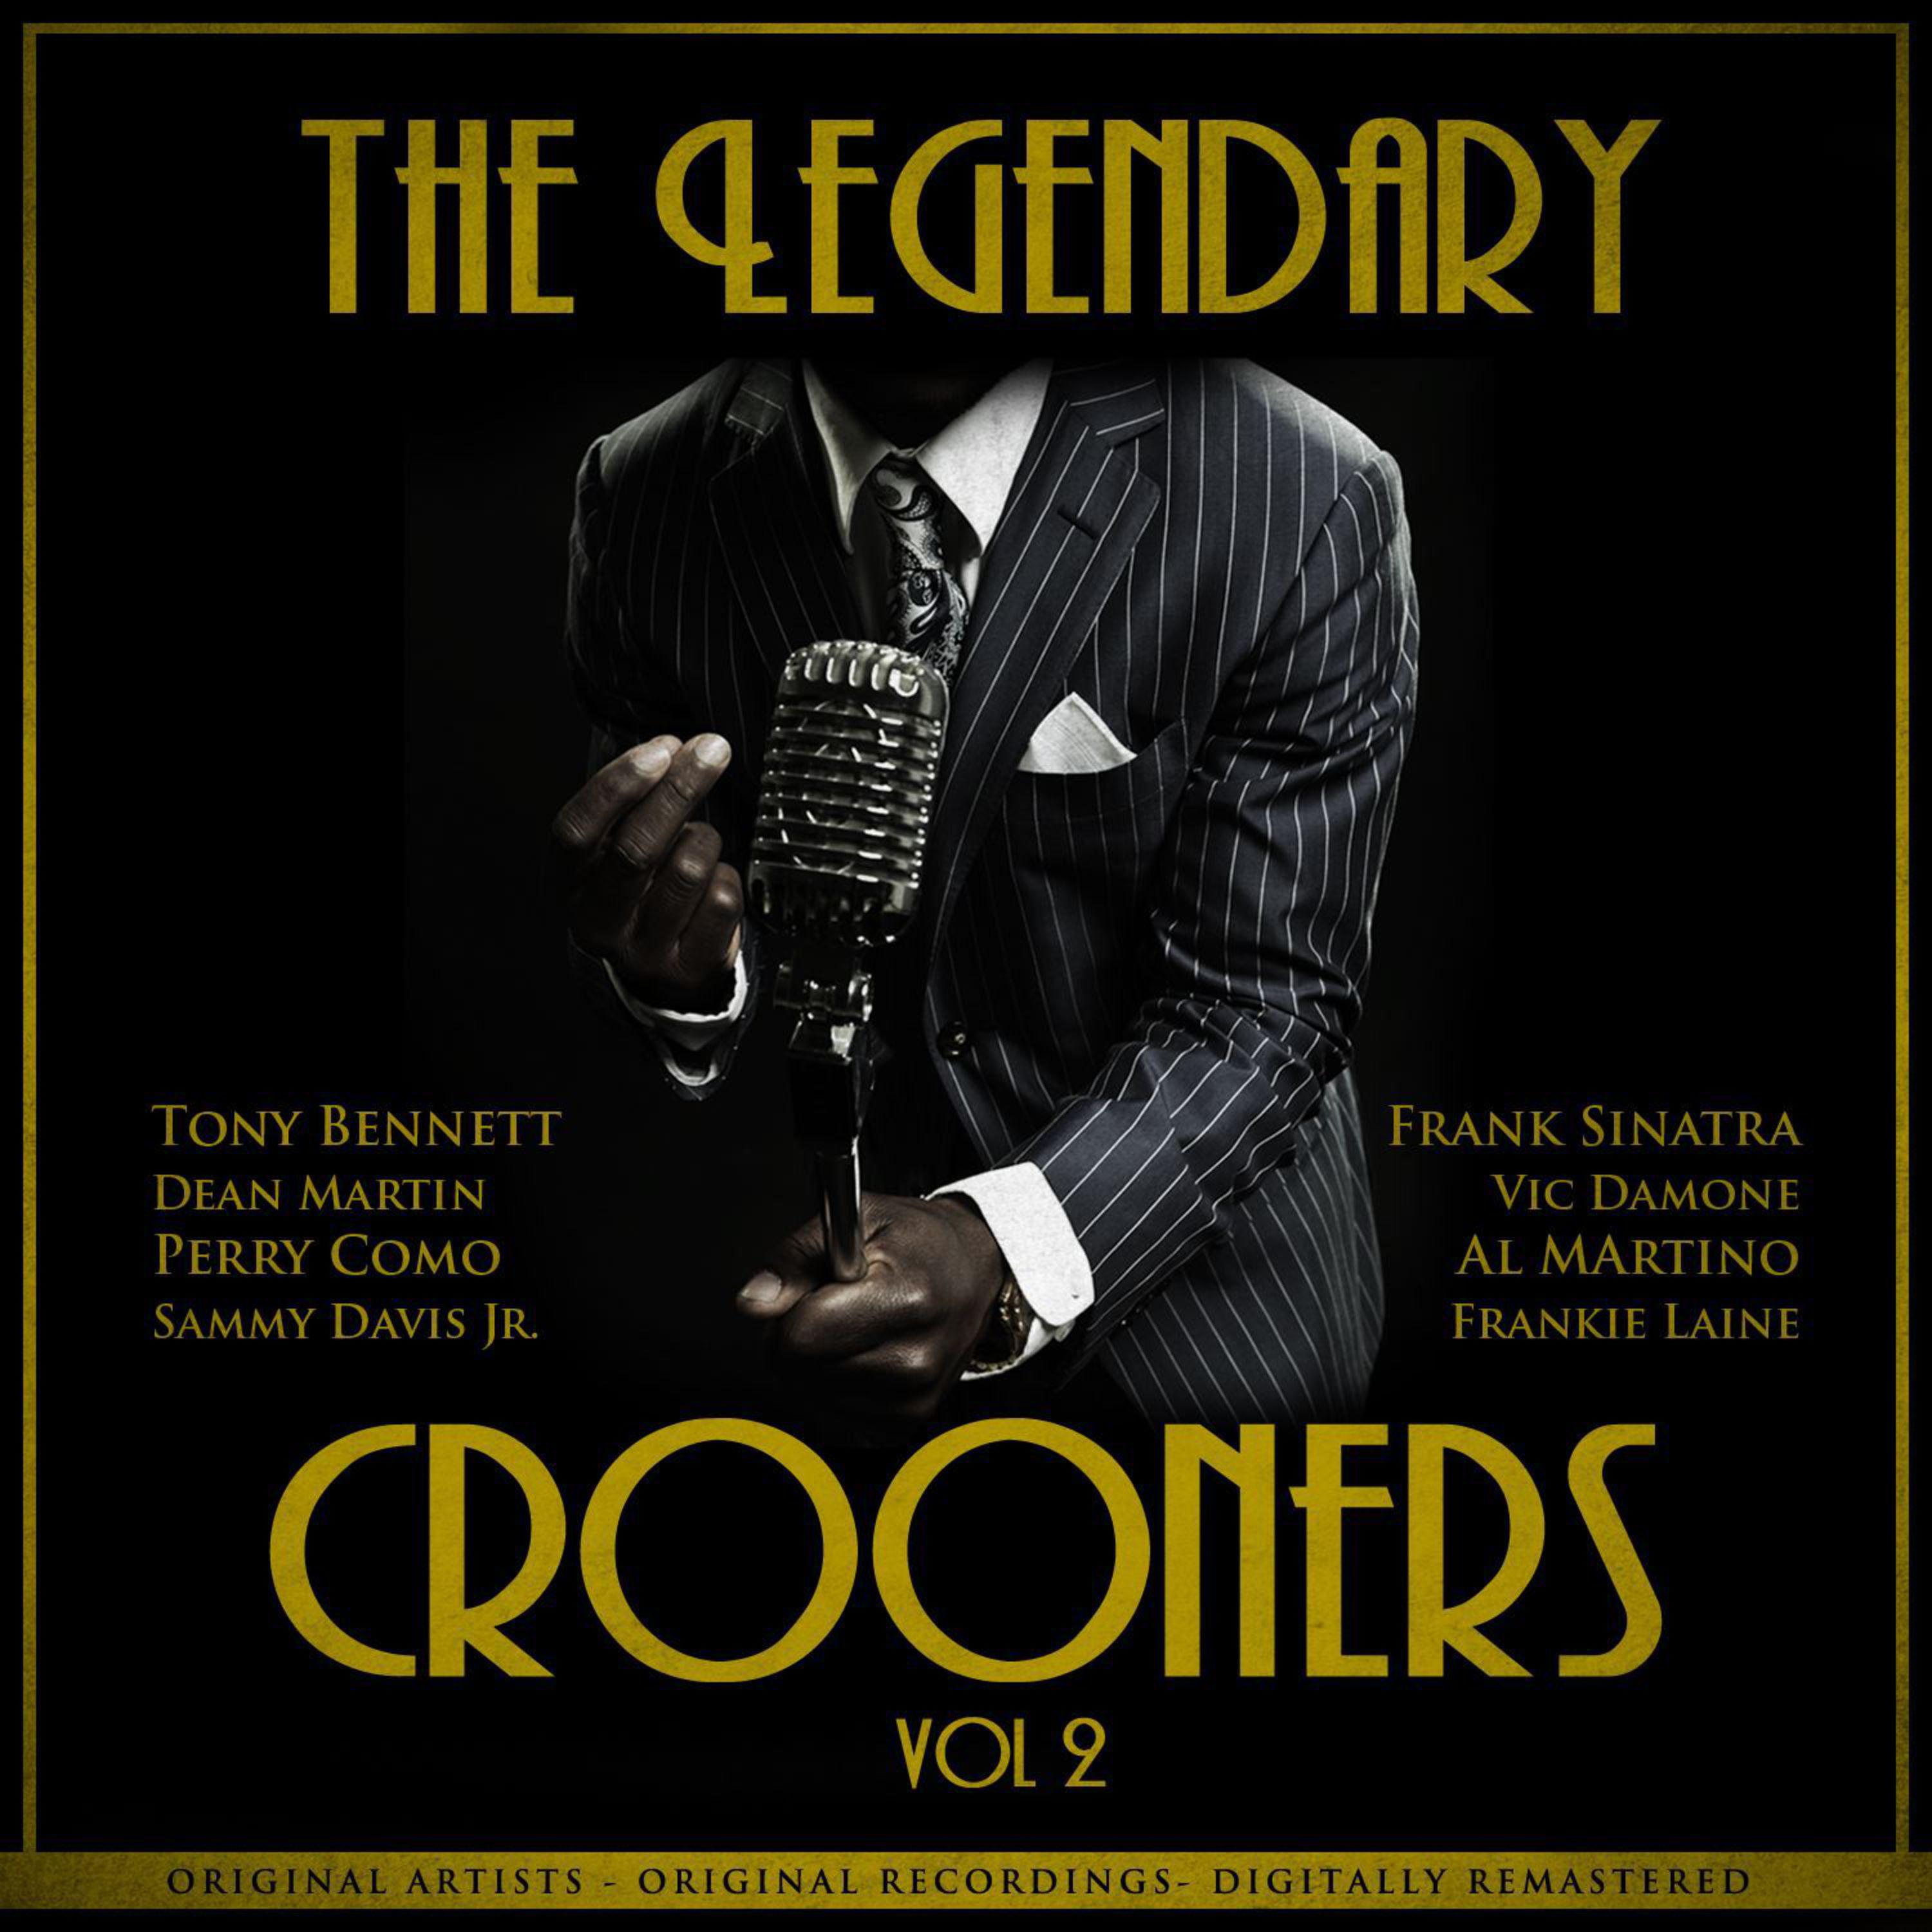 The Legendary Crooners Vol. 2 (Remastered)